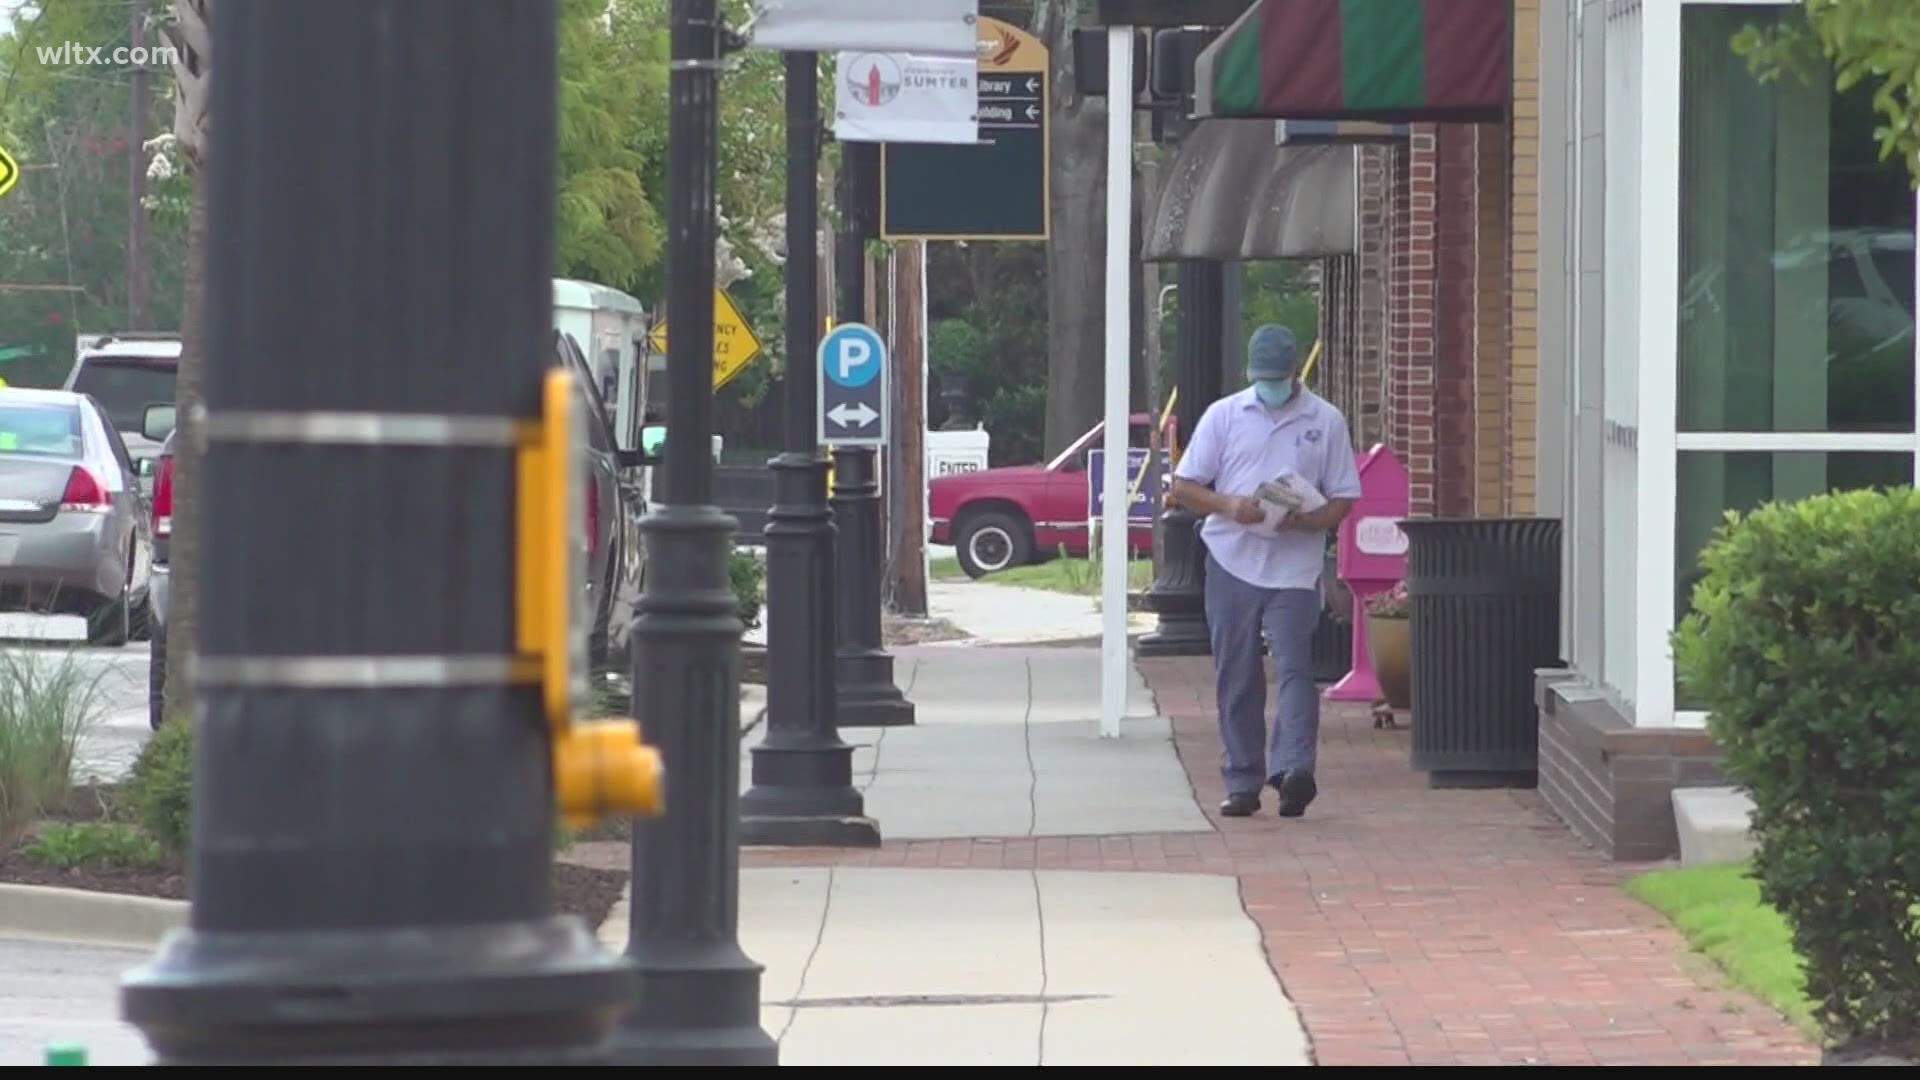 Officials in a South Carolina city say masks worn during the pandemic are among many items that have clogged its sewer system.